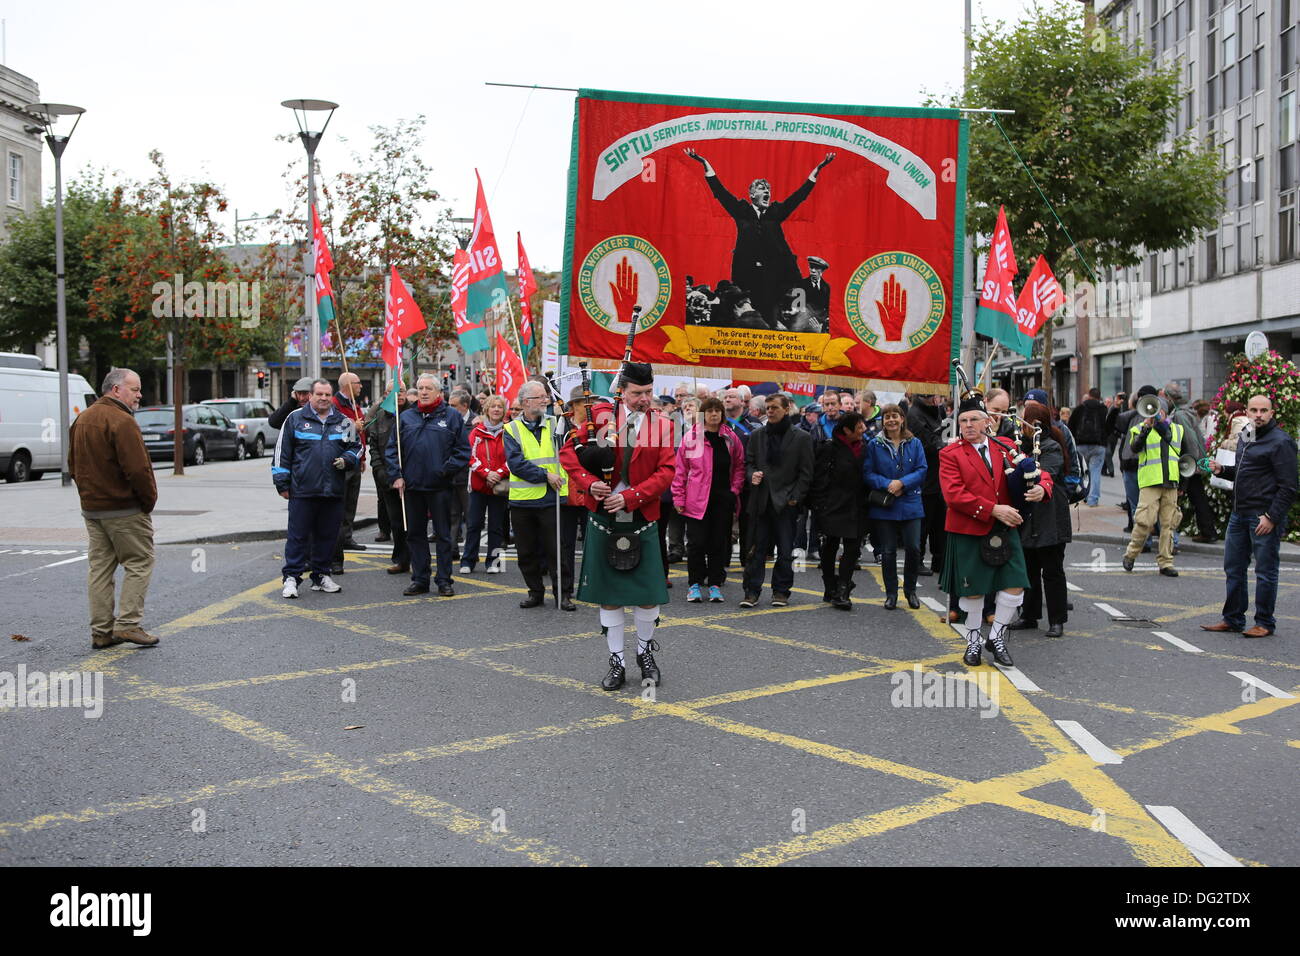 Dublin, Ireland. 12th October 2013. Members of SIPTU (Services Industrial Professional Technical Union) are being led by two bagpipers and a huge Union banner. Unions called for a protest march through Dublin, ahead of the announcing of the 2014 budget next week. They protested against cuts in Social Welfare, Health and Education and for an utilisation of alternative revenue sources by the government. © Michael Debets/Alamy Live News Stock Photo